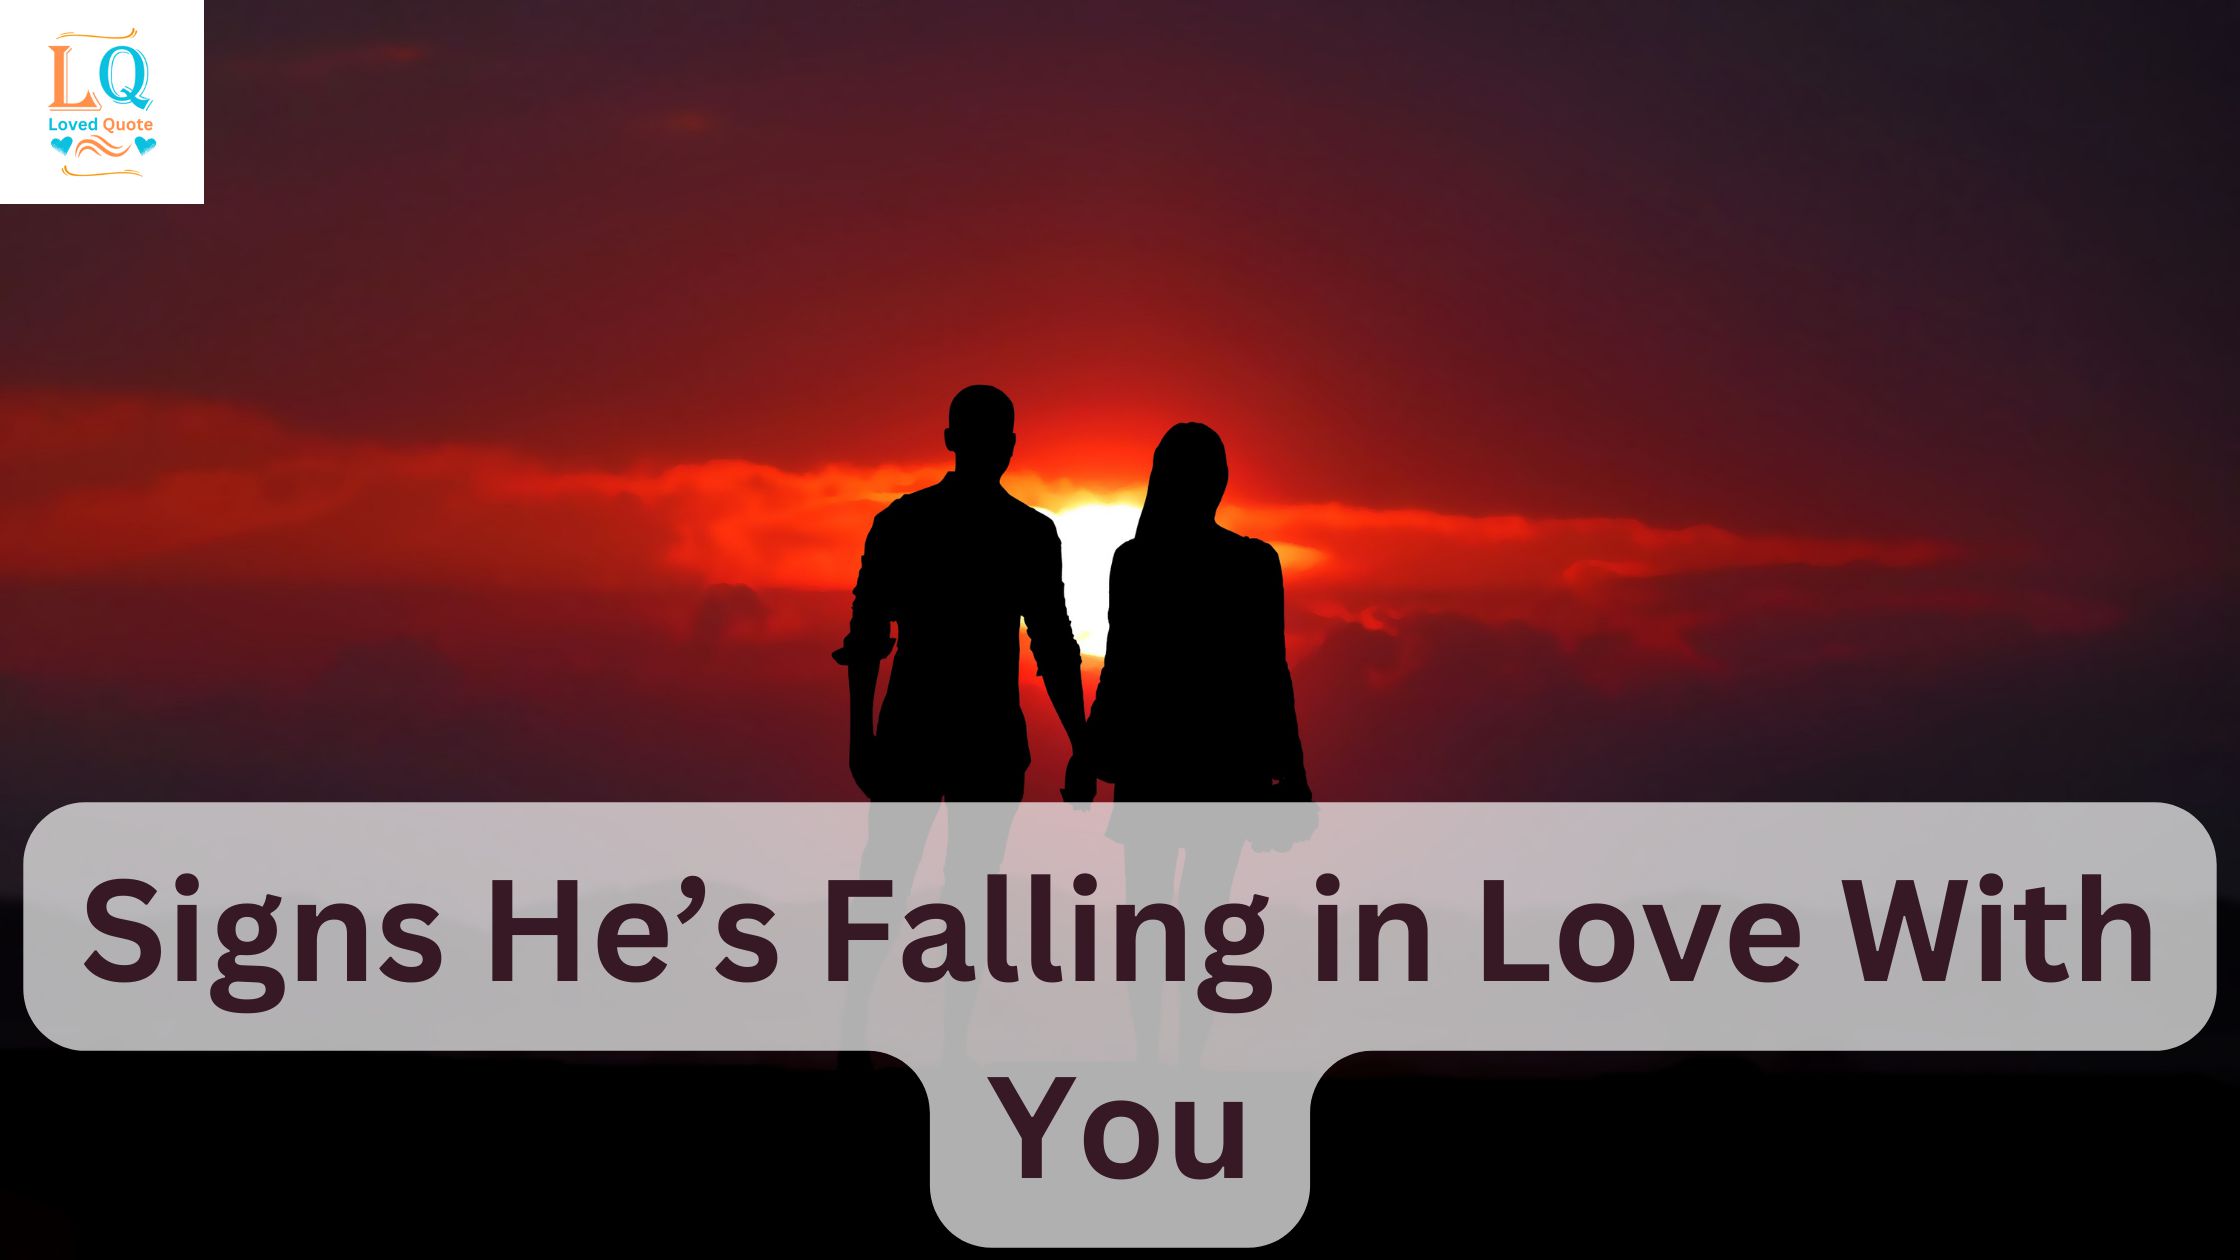 Signs He’s Falling in Love With You